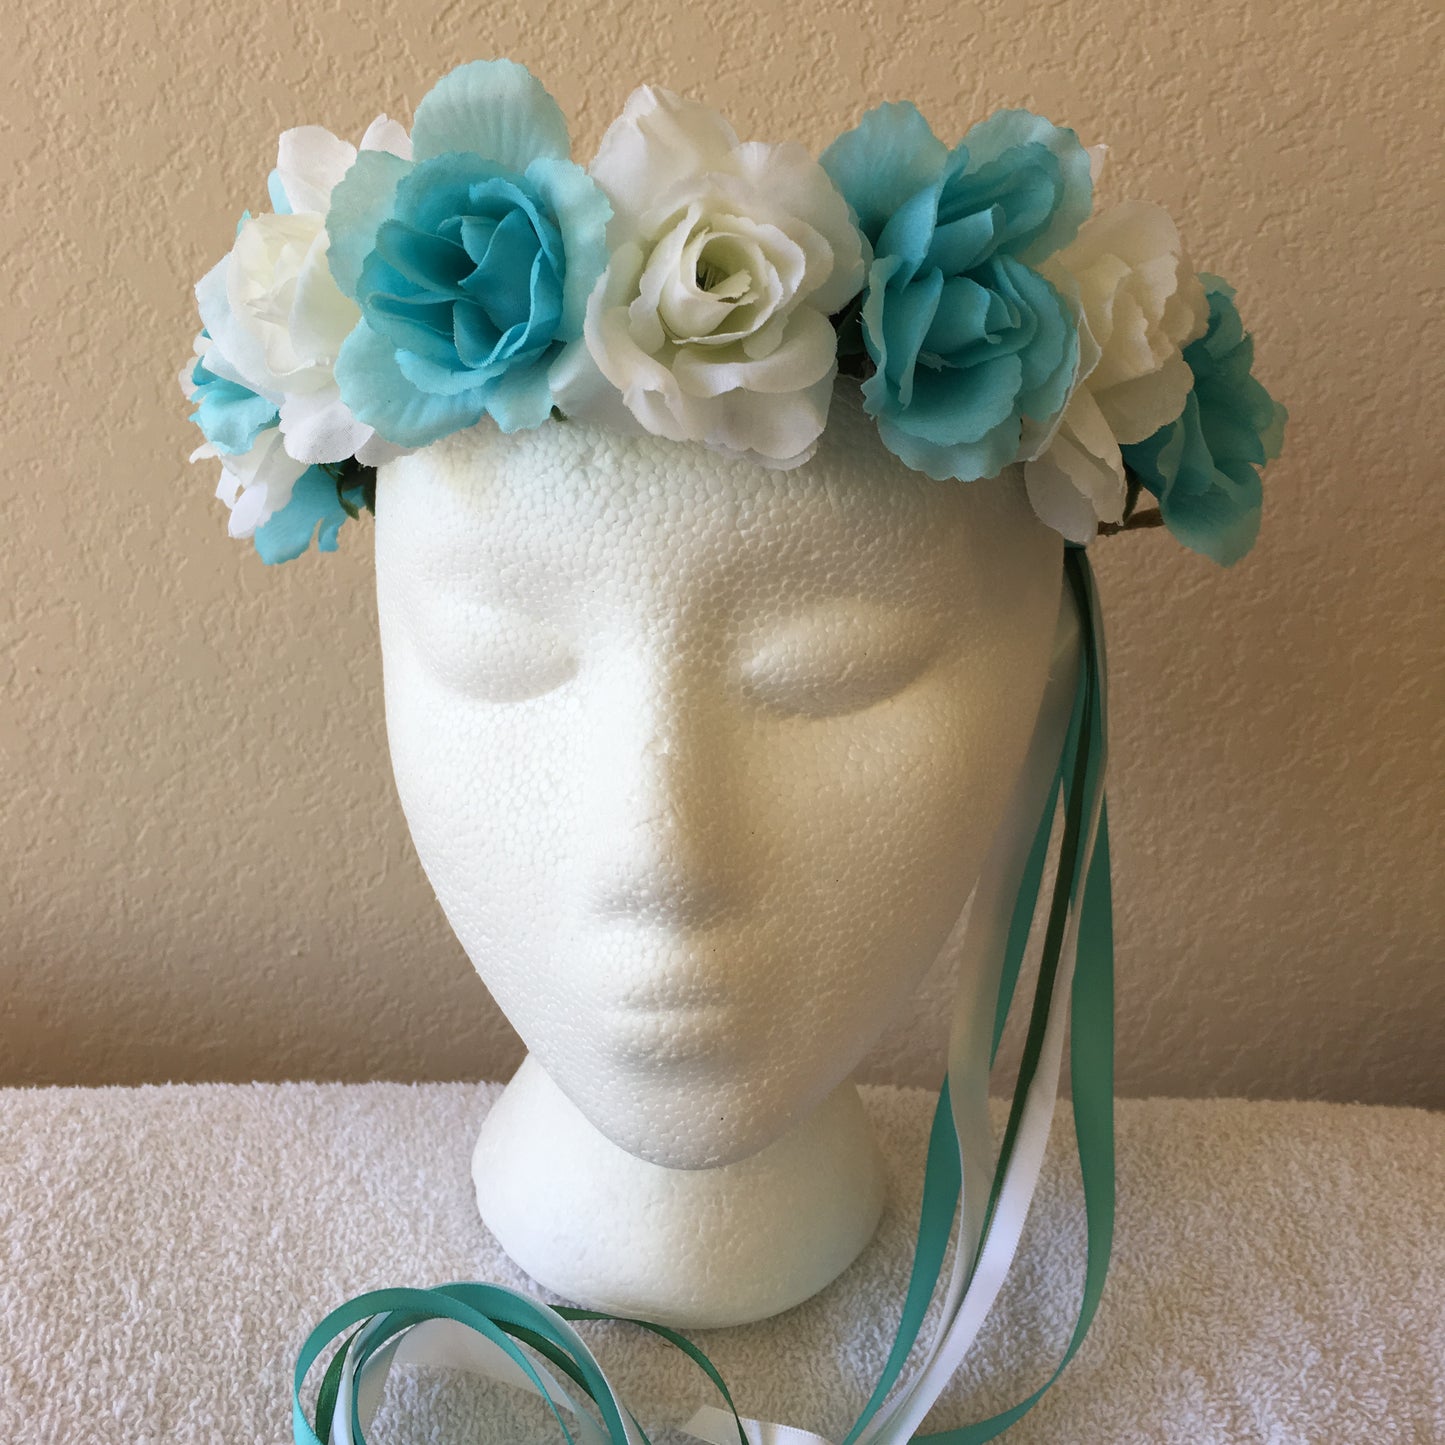 Small Wreath - Teal & white roses